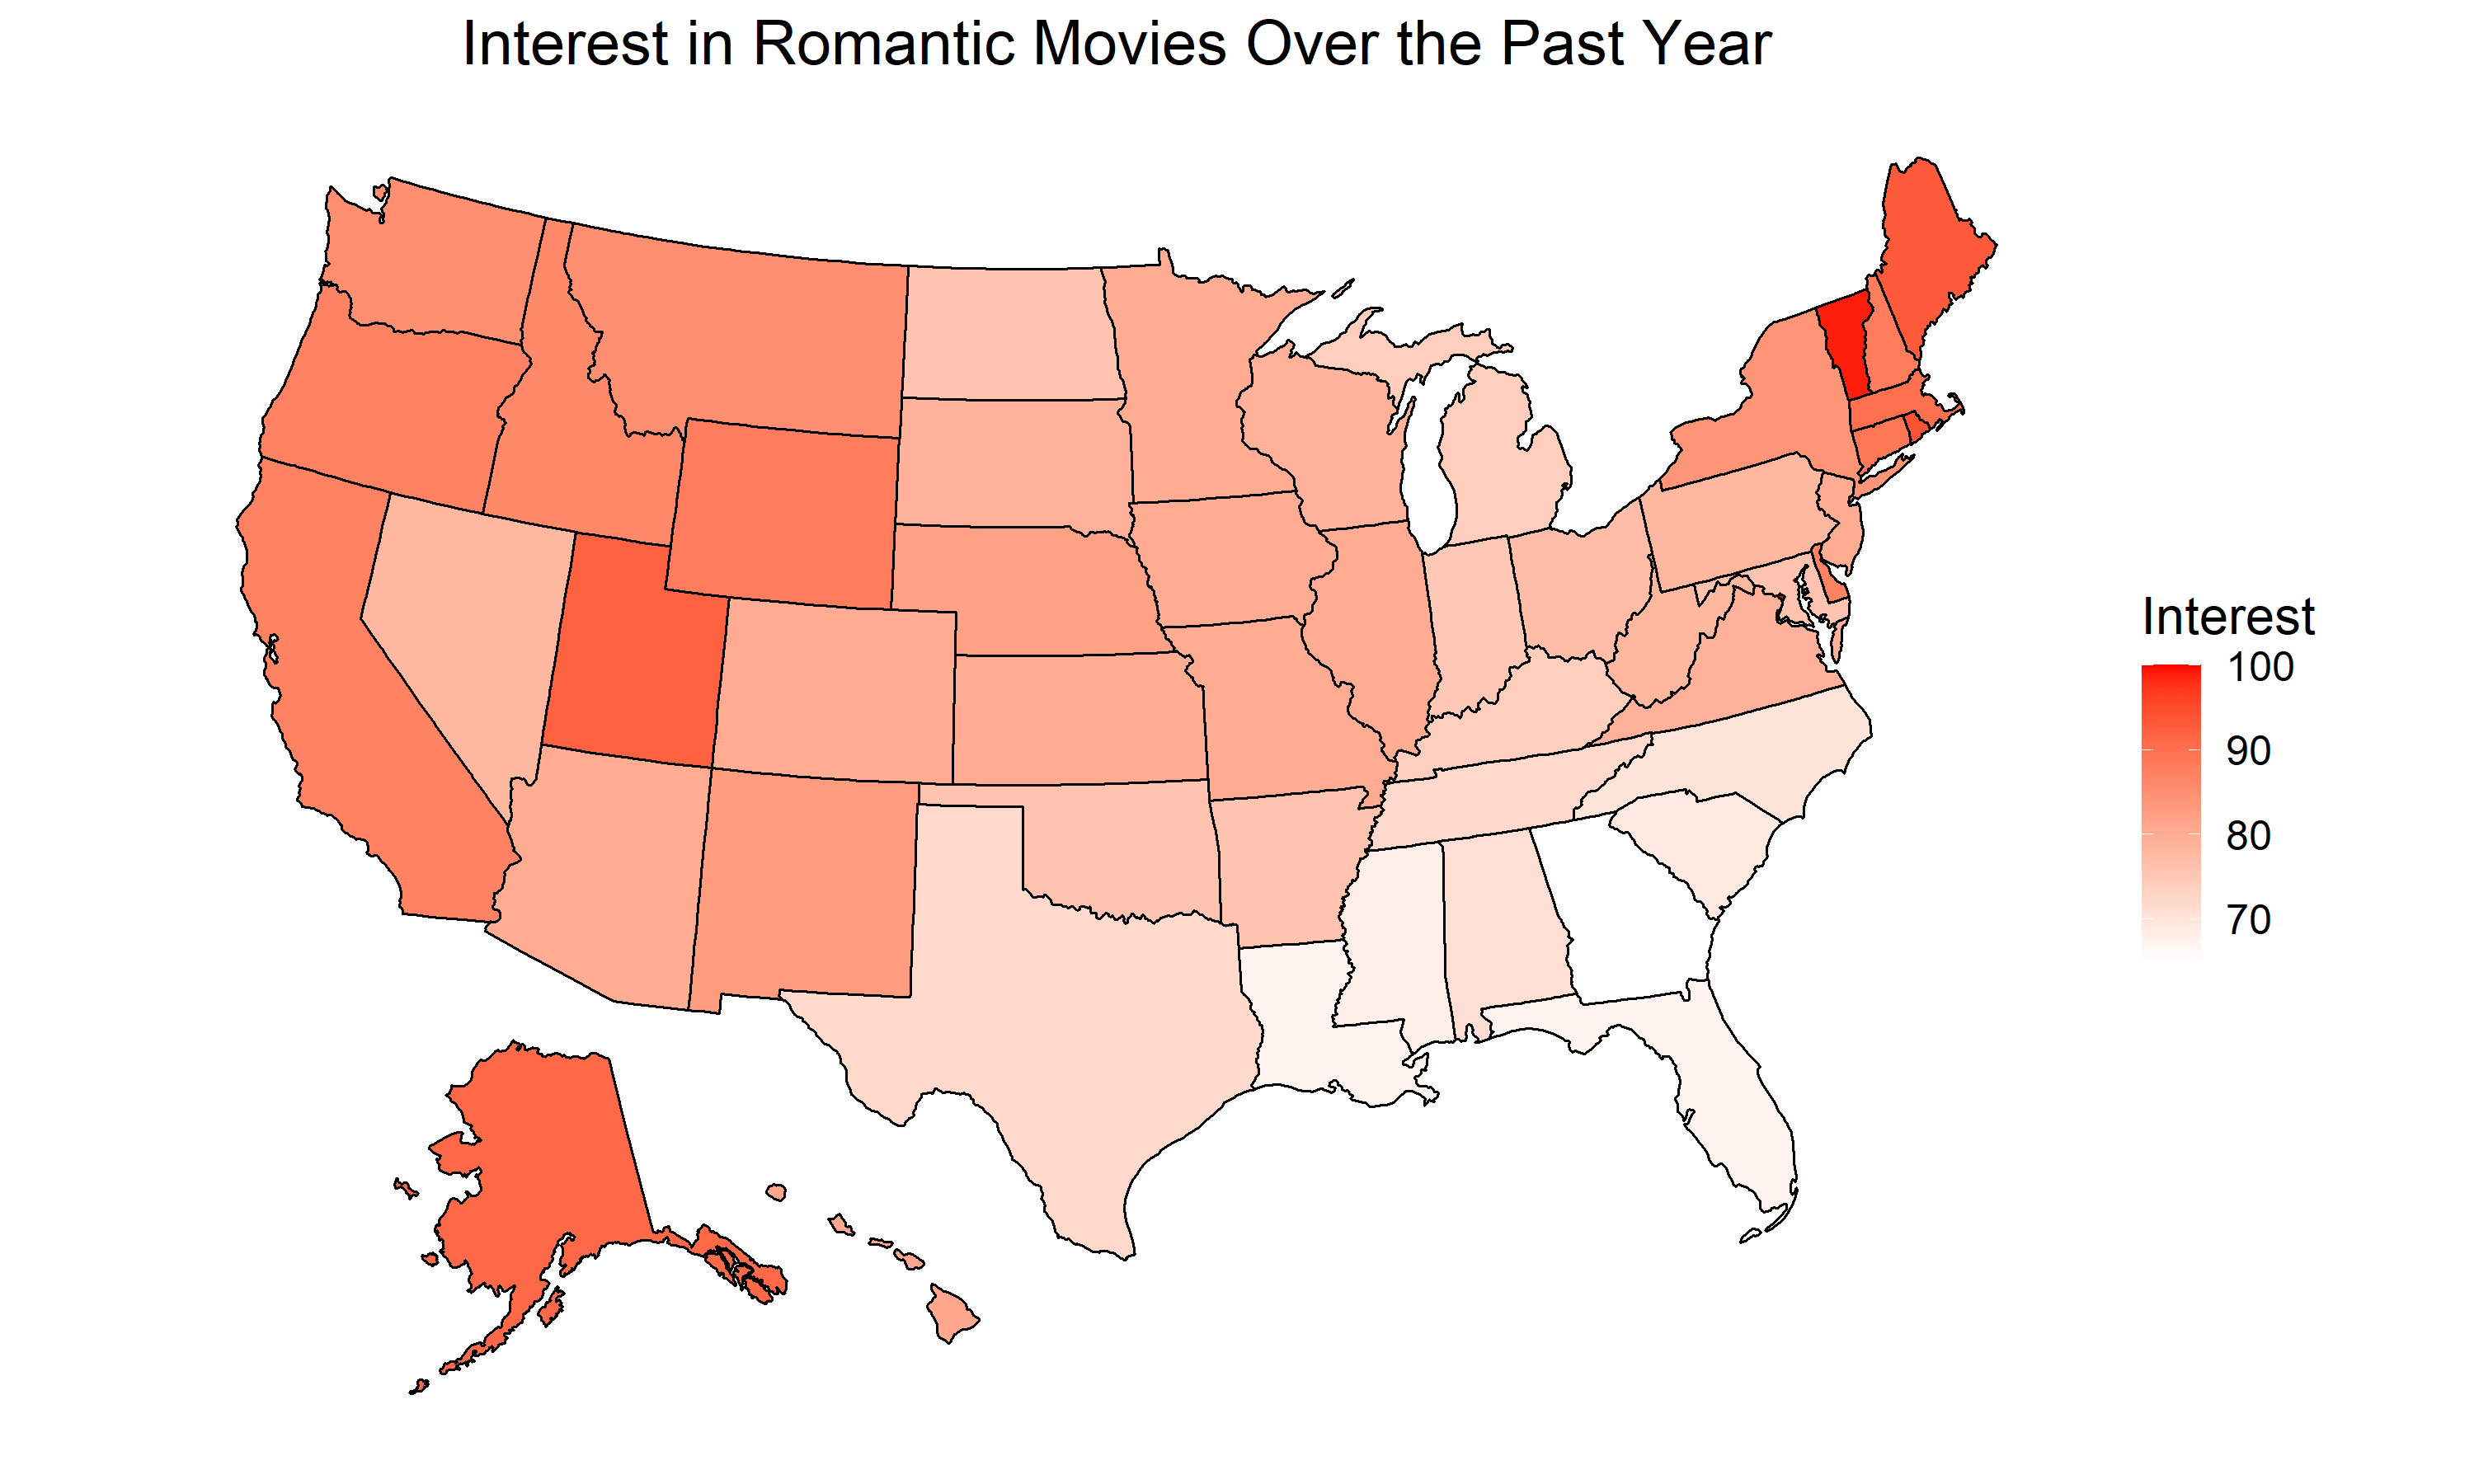 states' interest in romantic movies